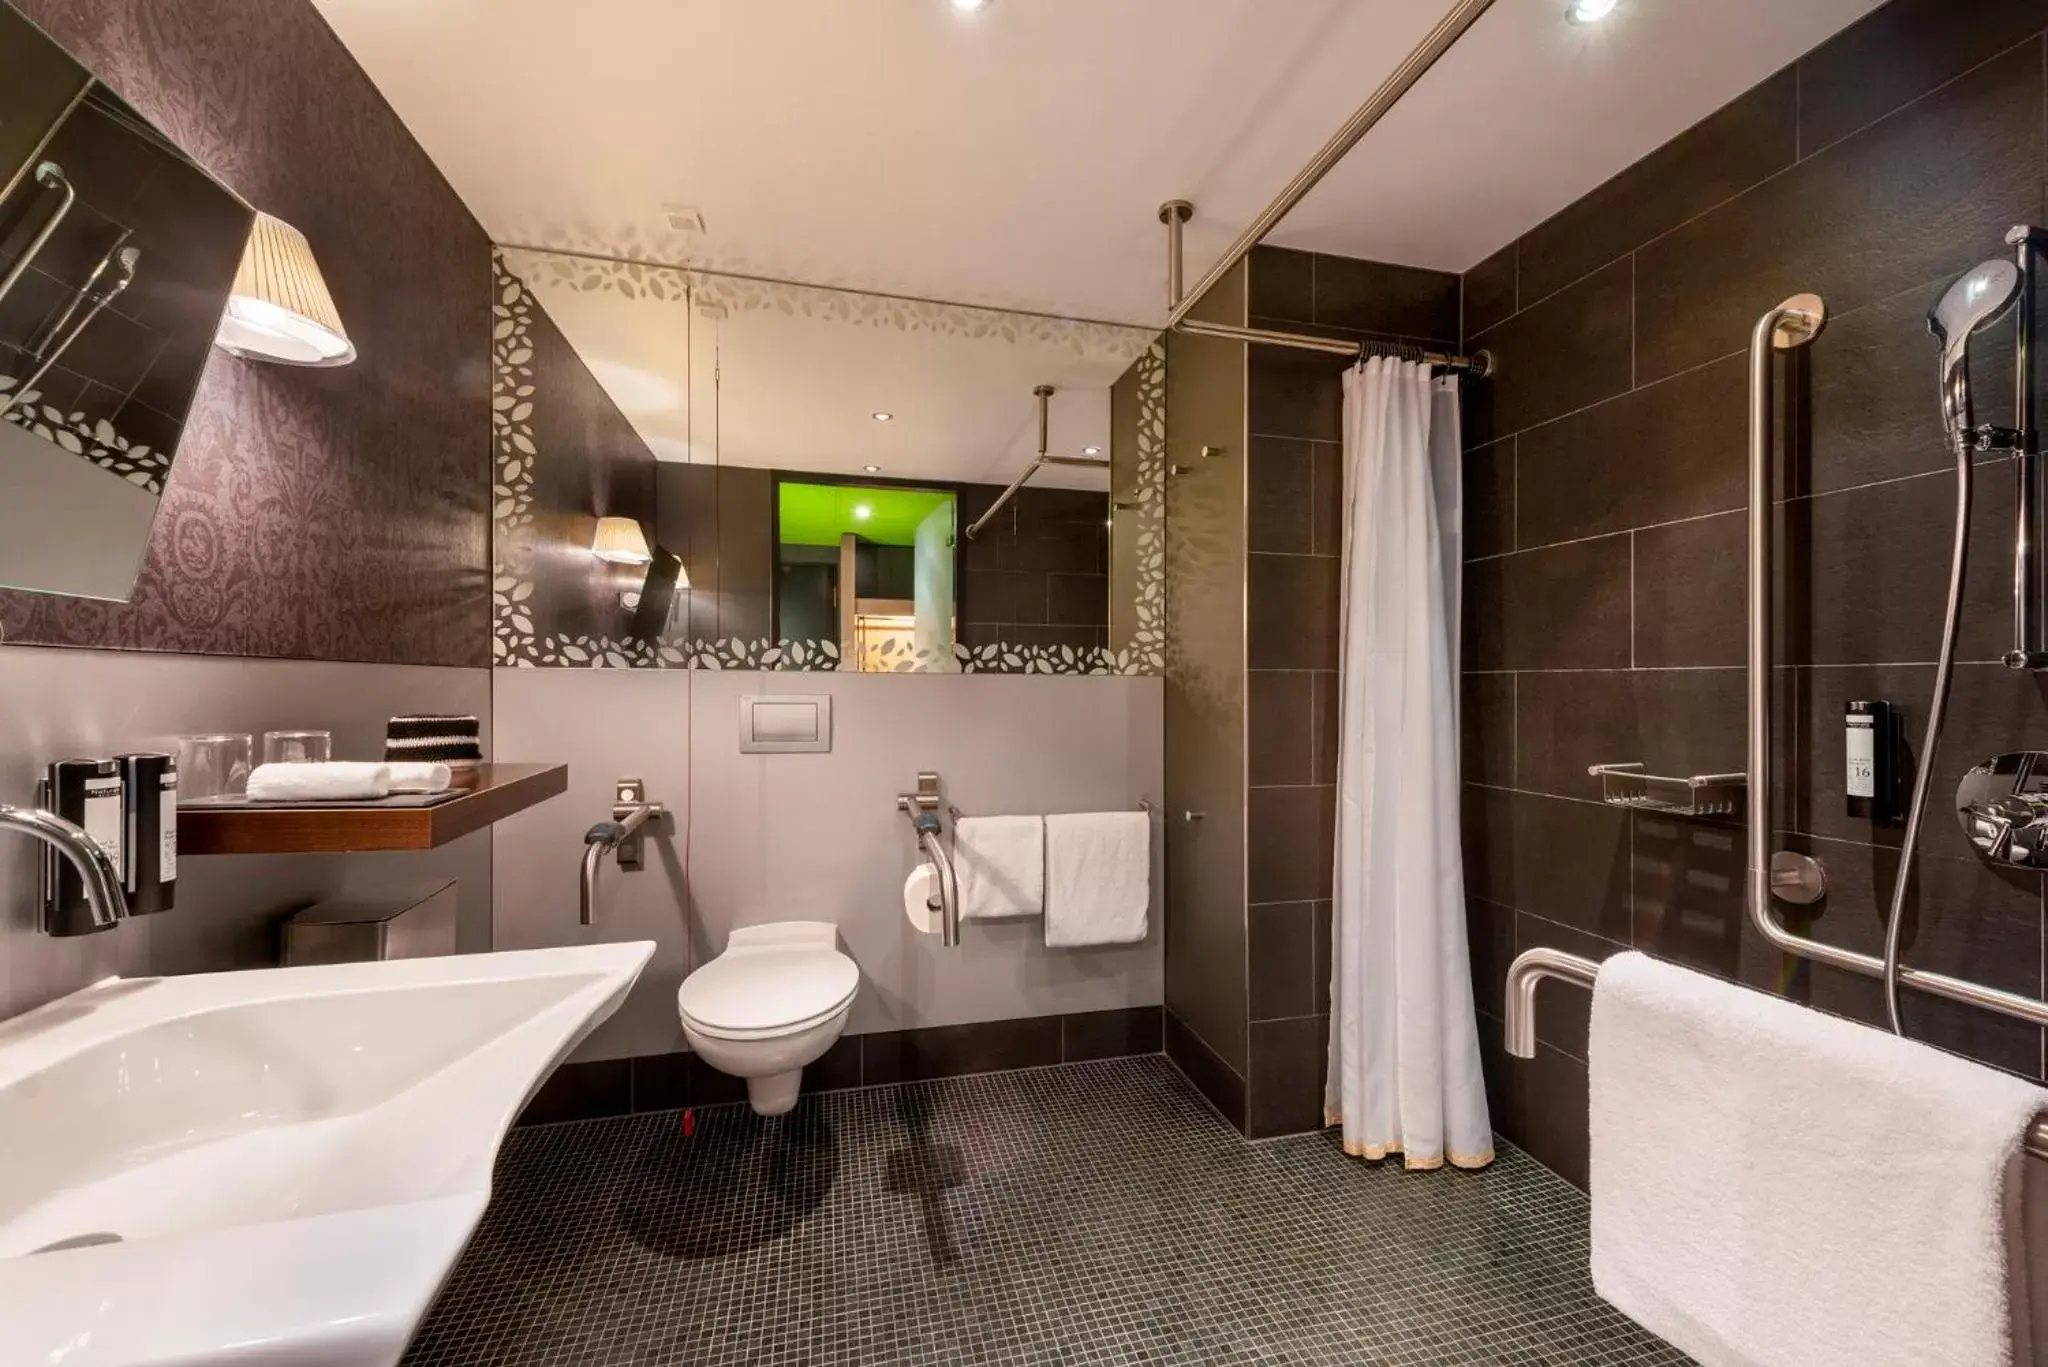 Facility for disabled guests, Bathroom in Mövenpick Hotel Stuttgart Airport